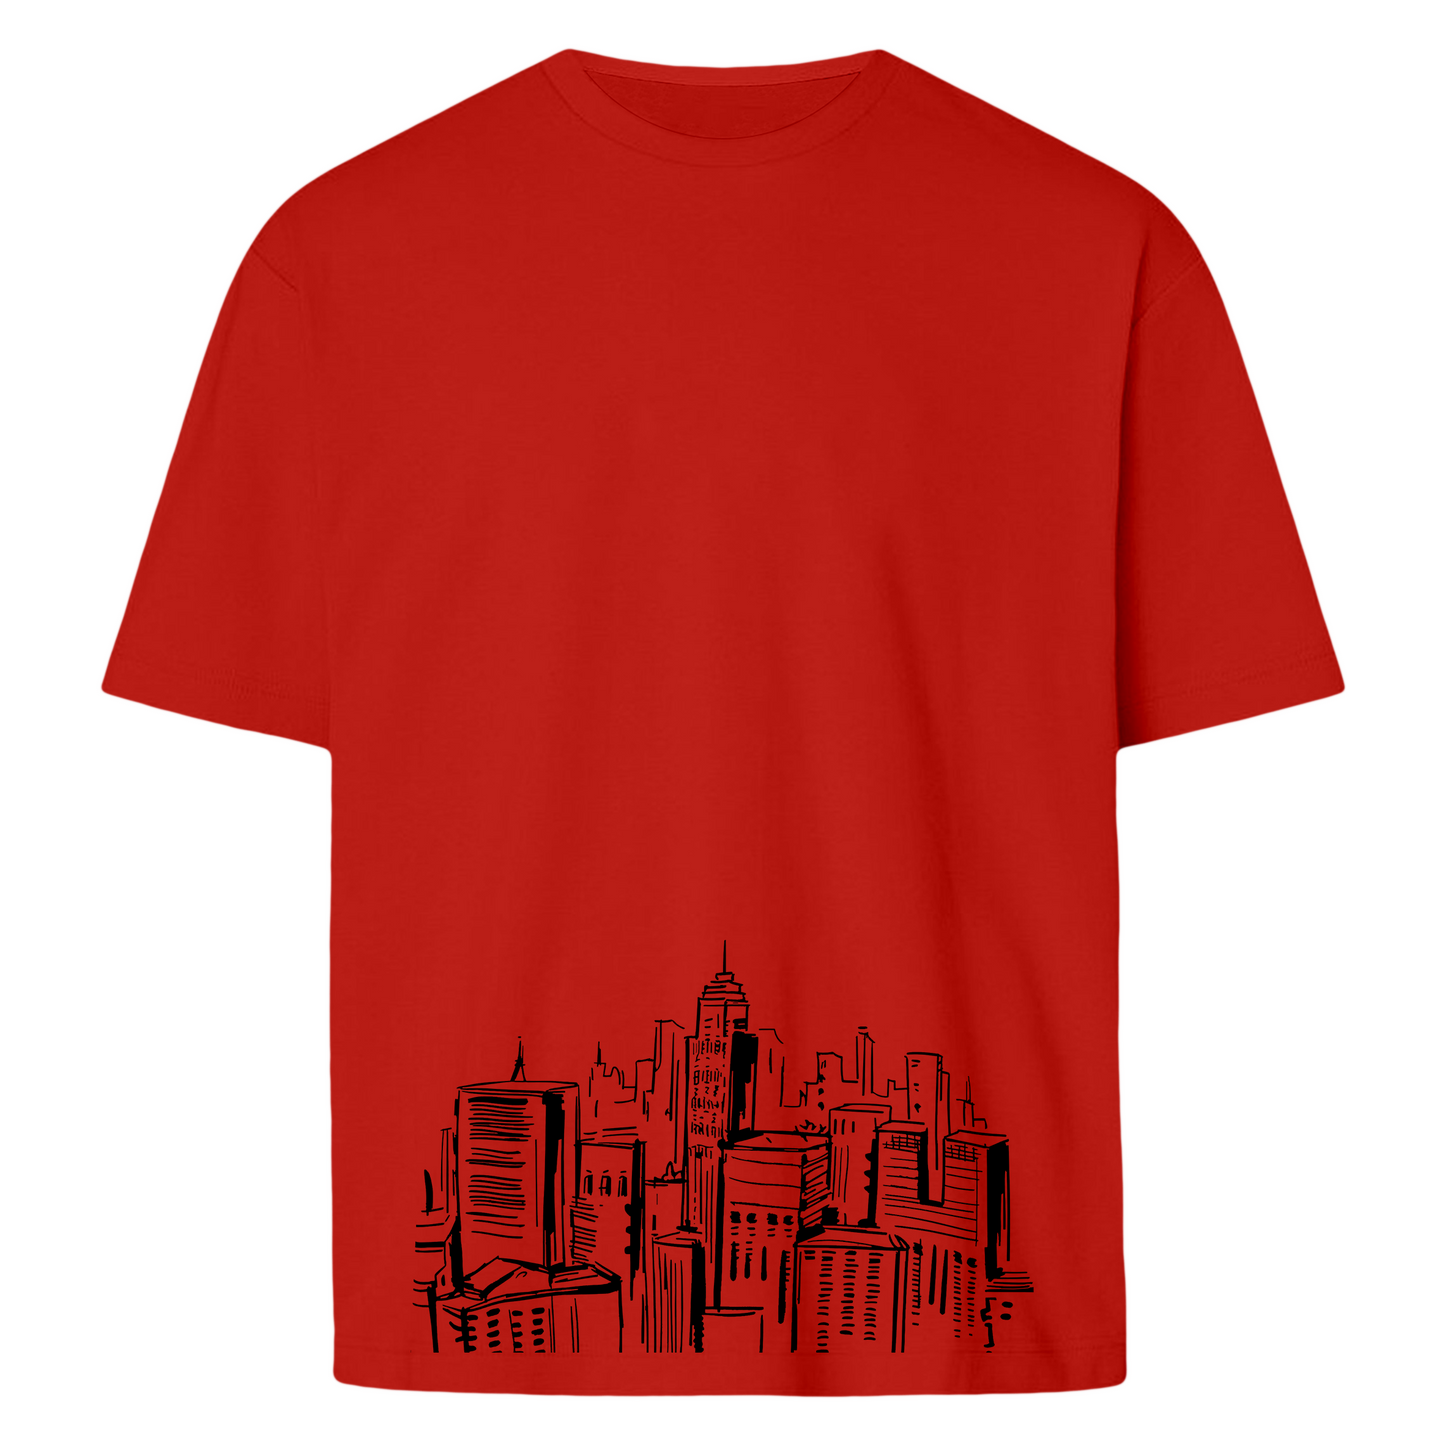 The lost City - T-shirt